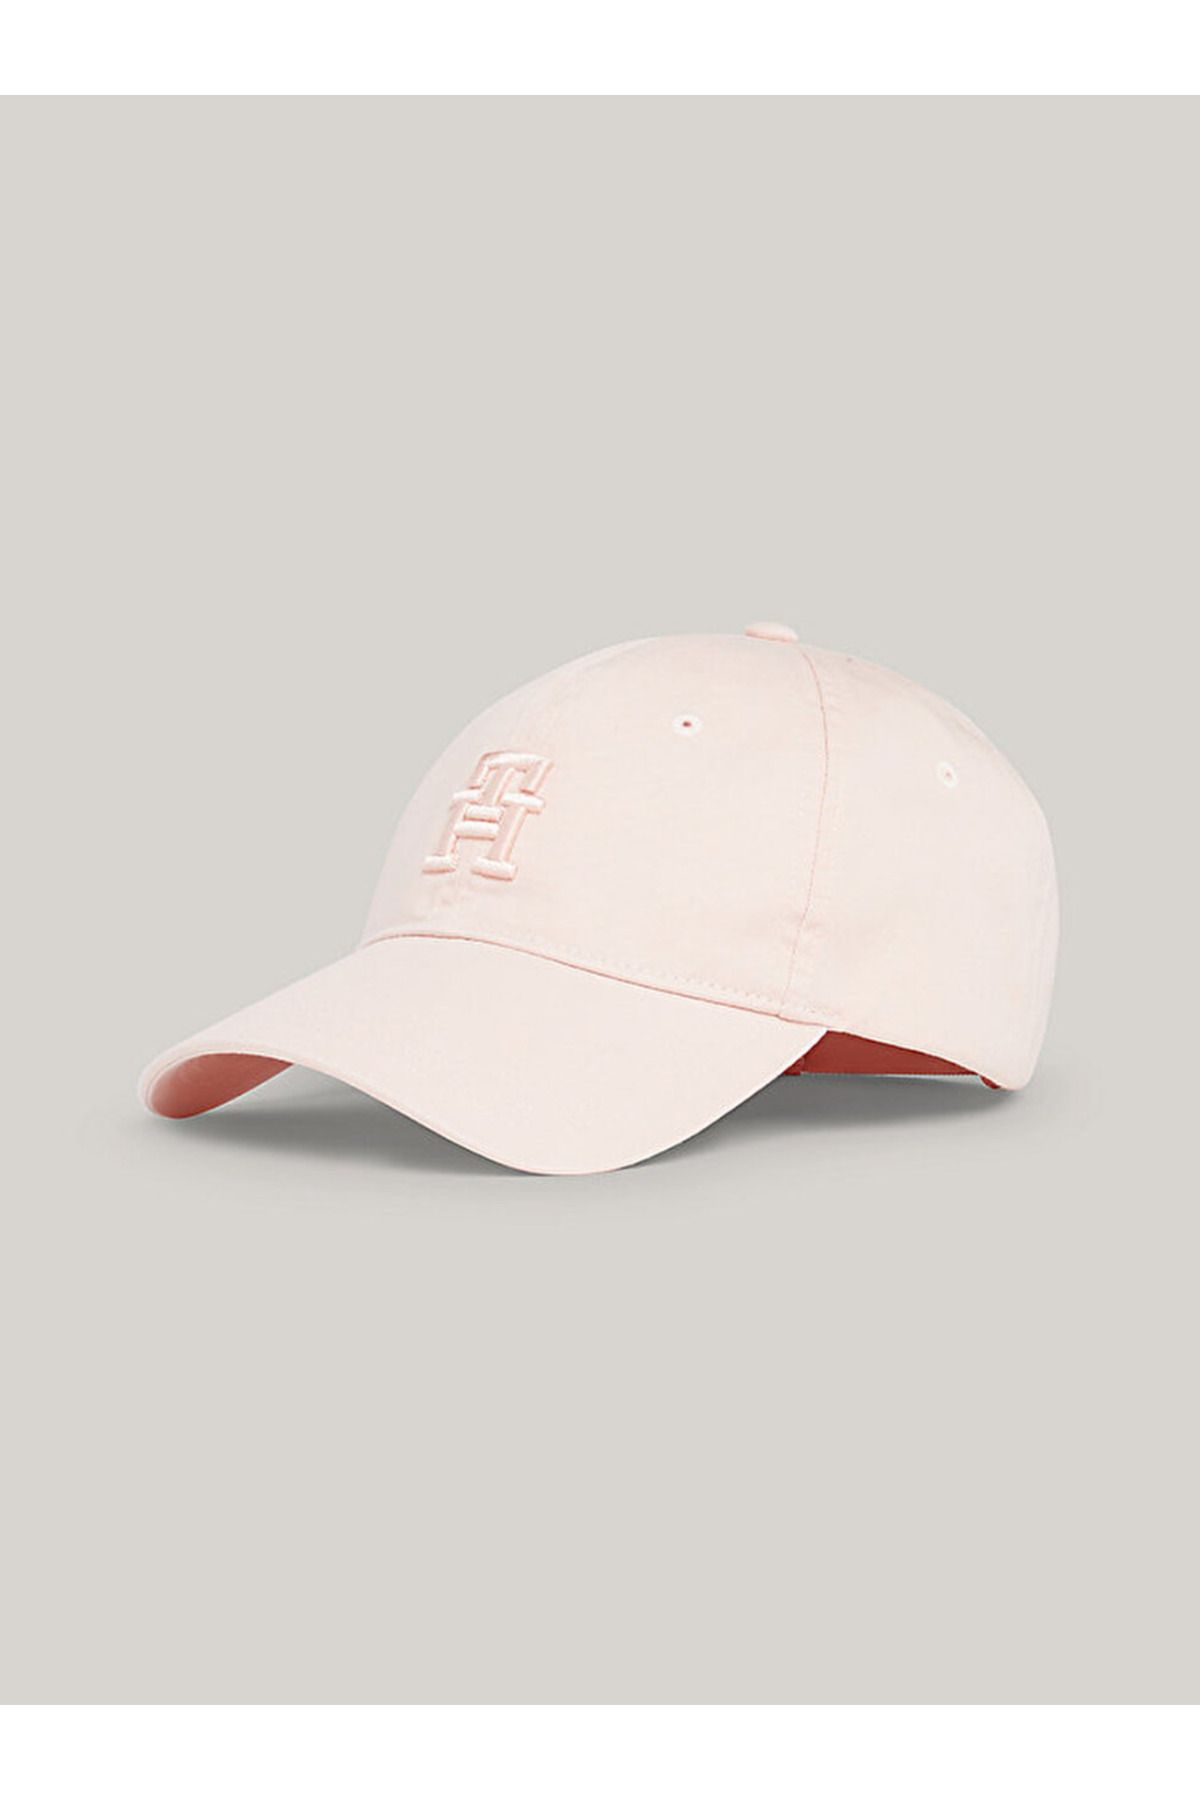 Tommy Hilfiger Soft Tonal Embroidery Cap